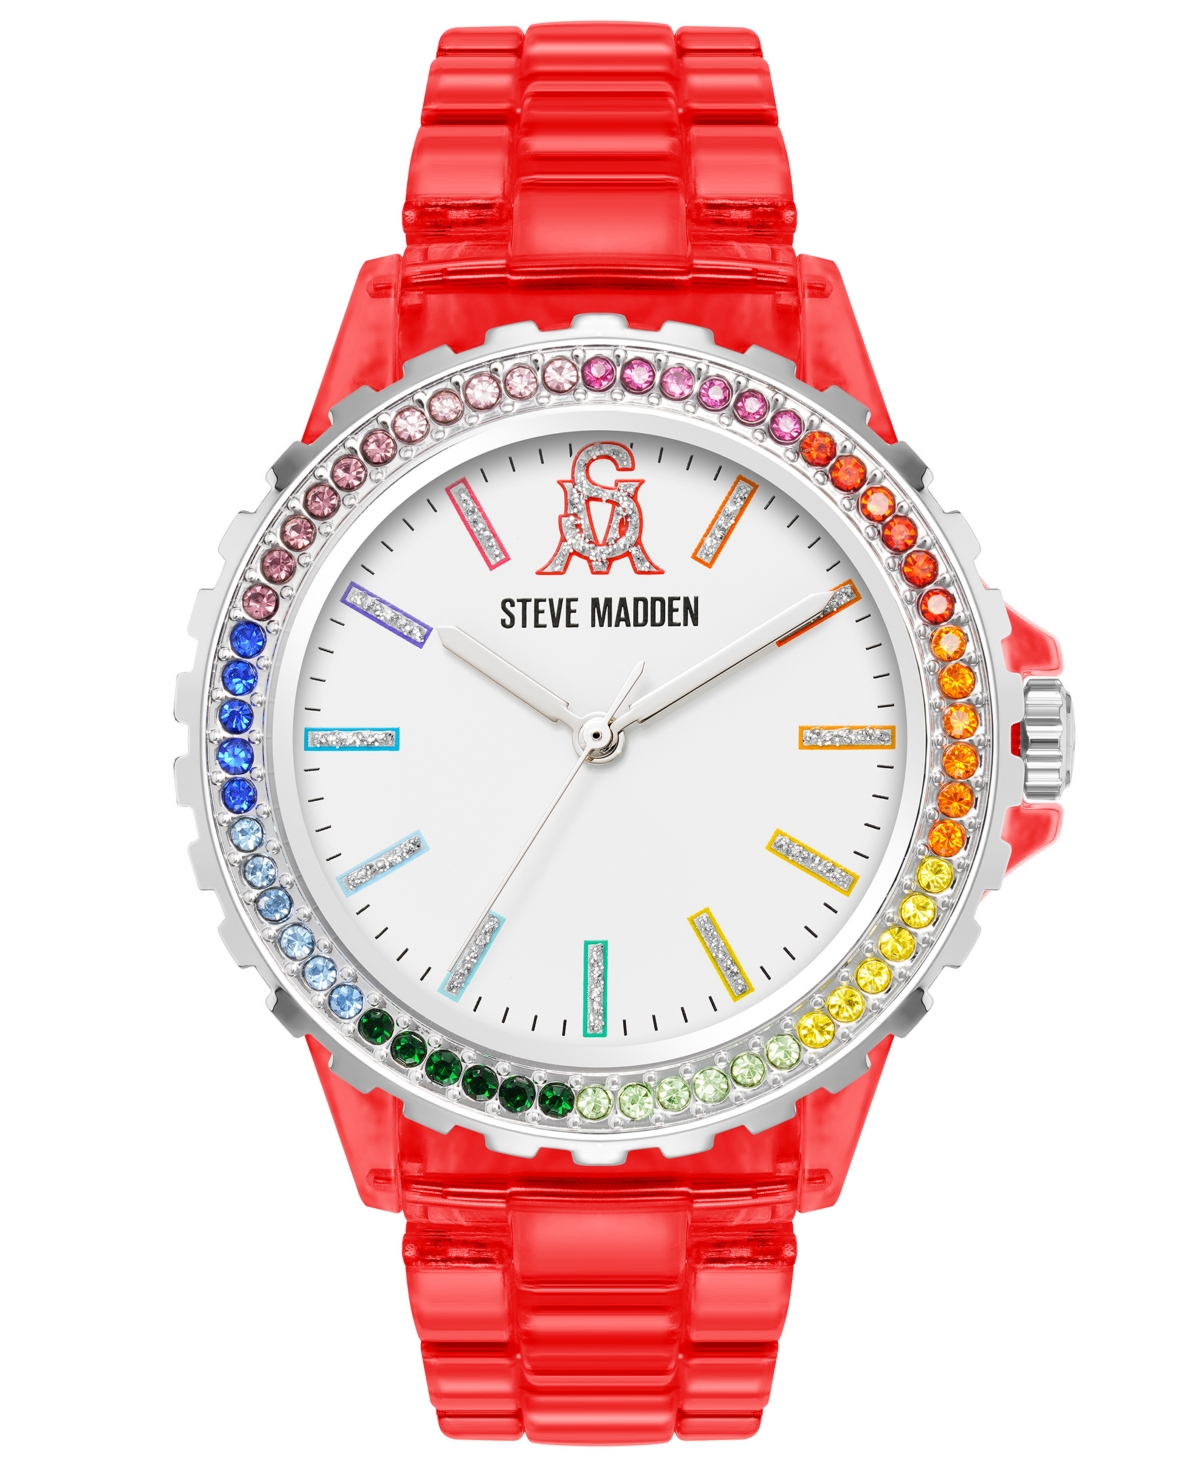 Steve Madden Women's Analog Transparent Red Plastic With Rainbow Crystal Bracelet Watch, 40mm